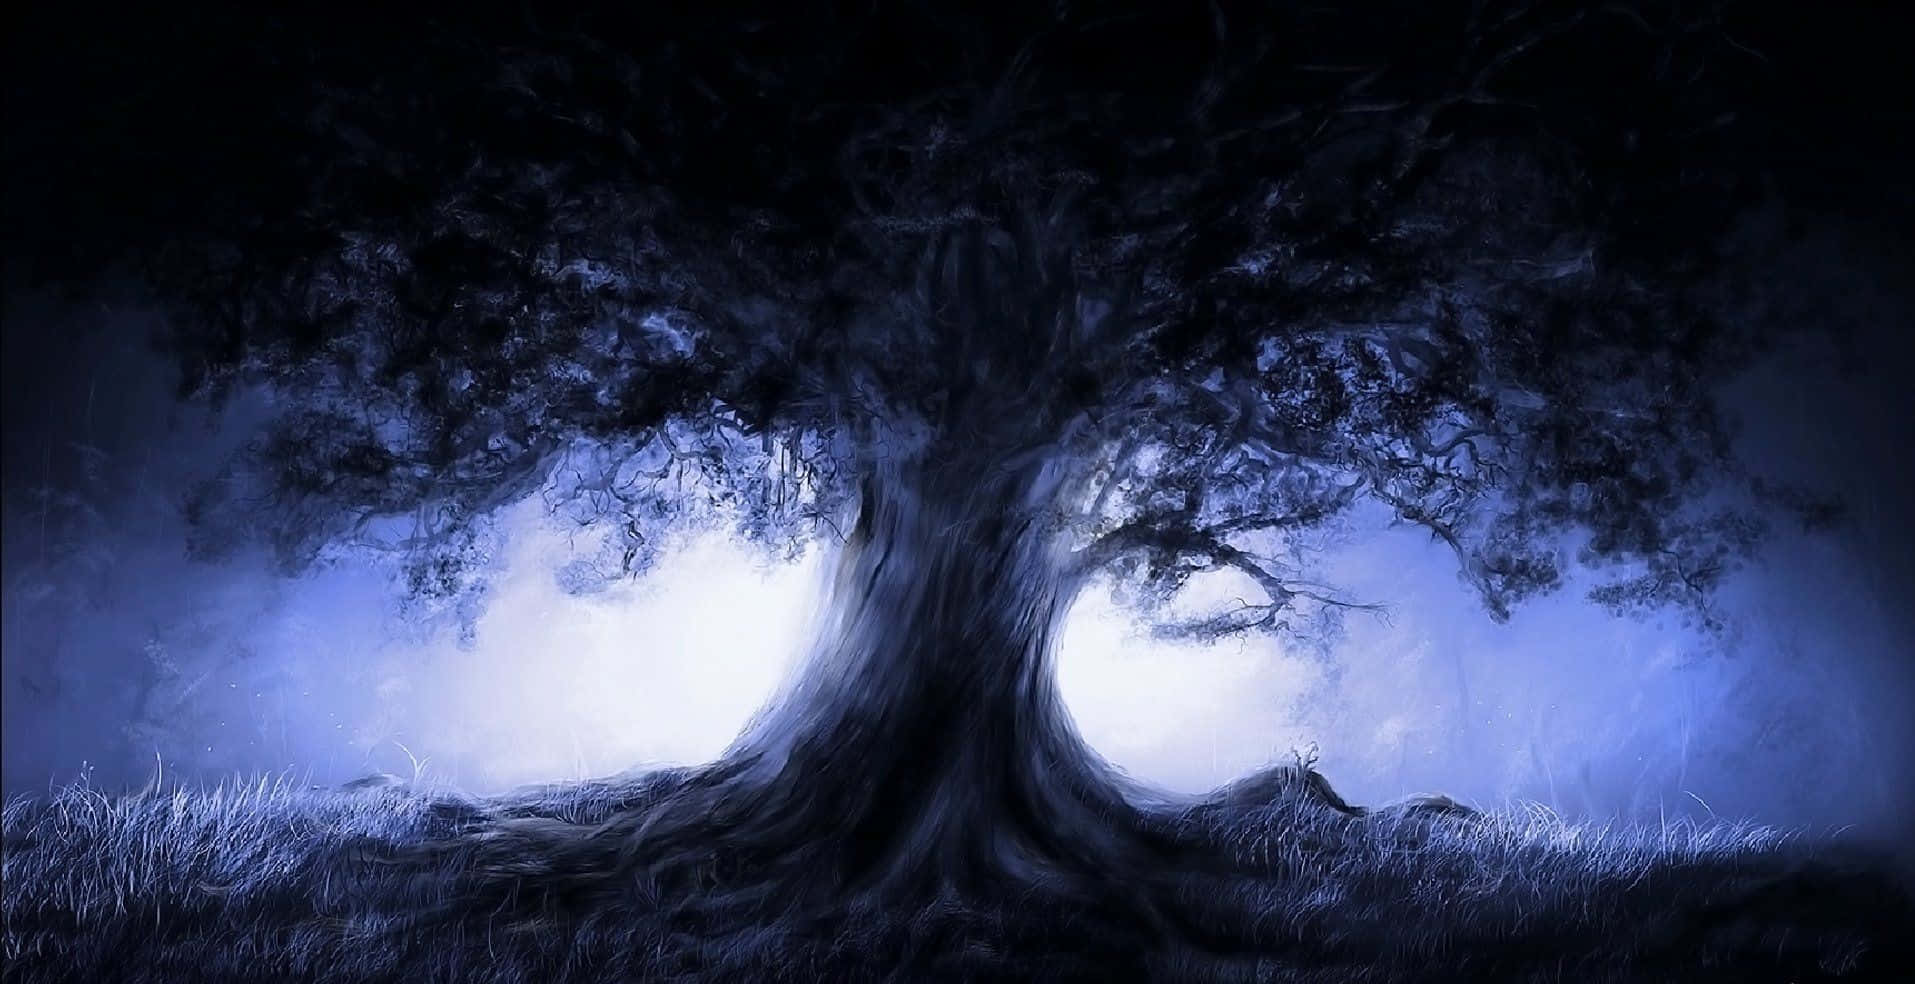 A Painting Of A Tree In The Dark